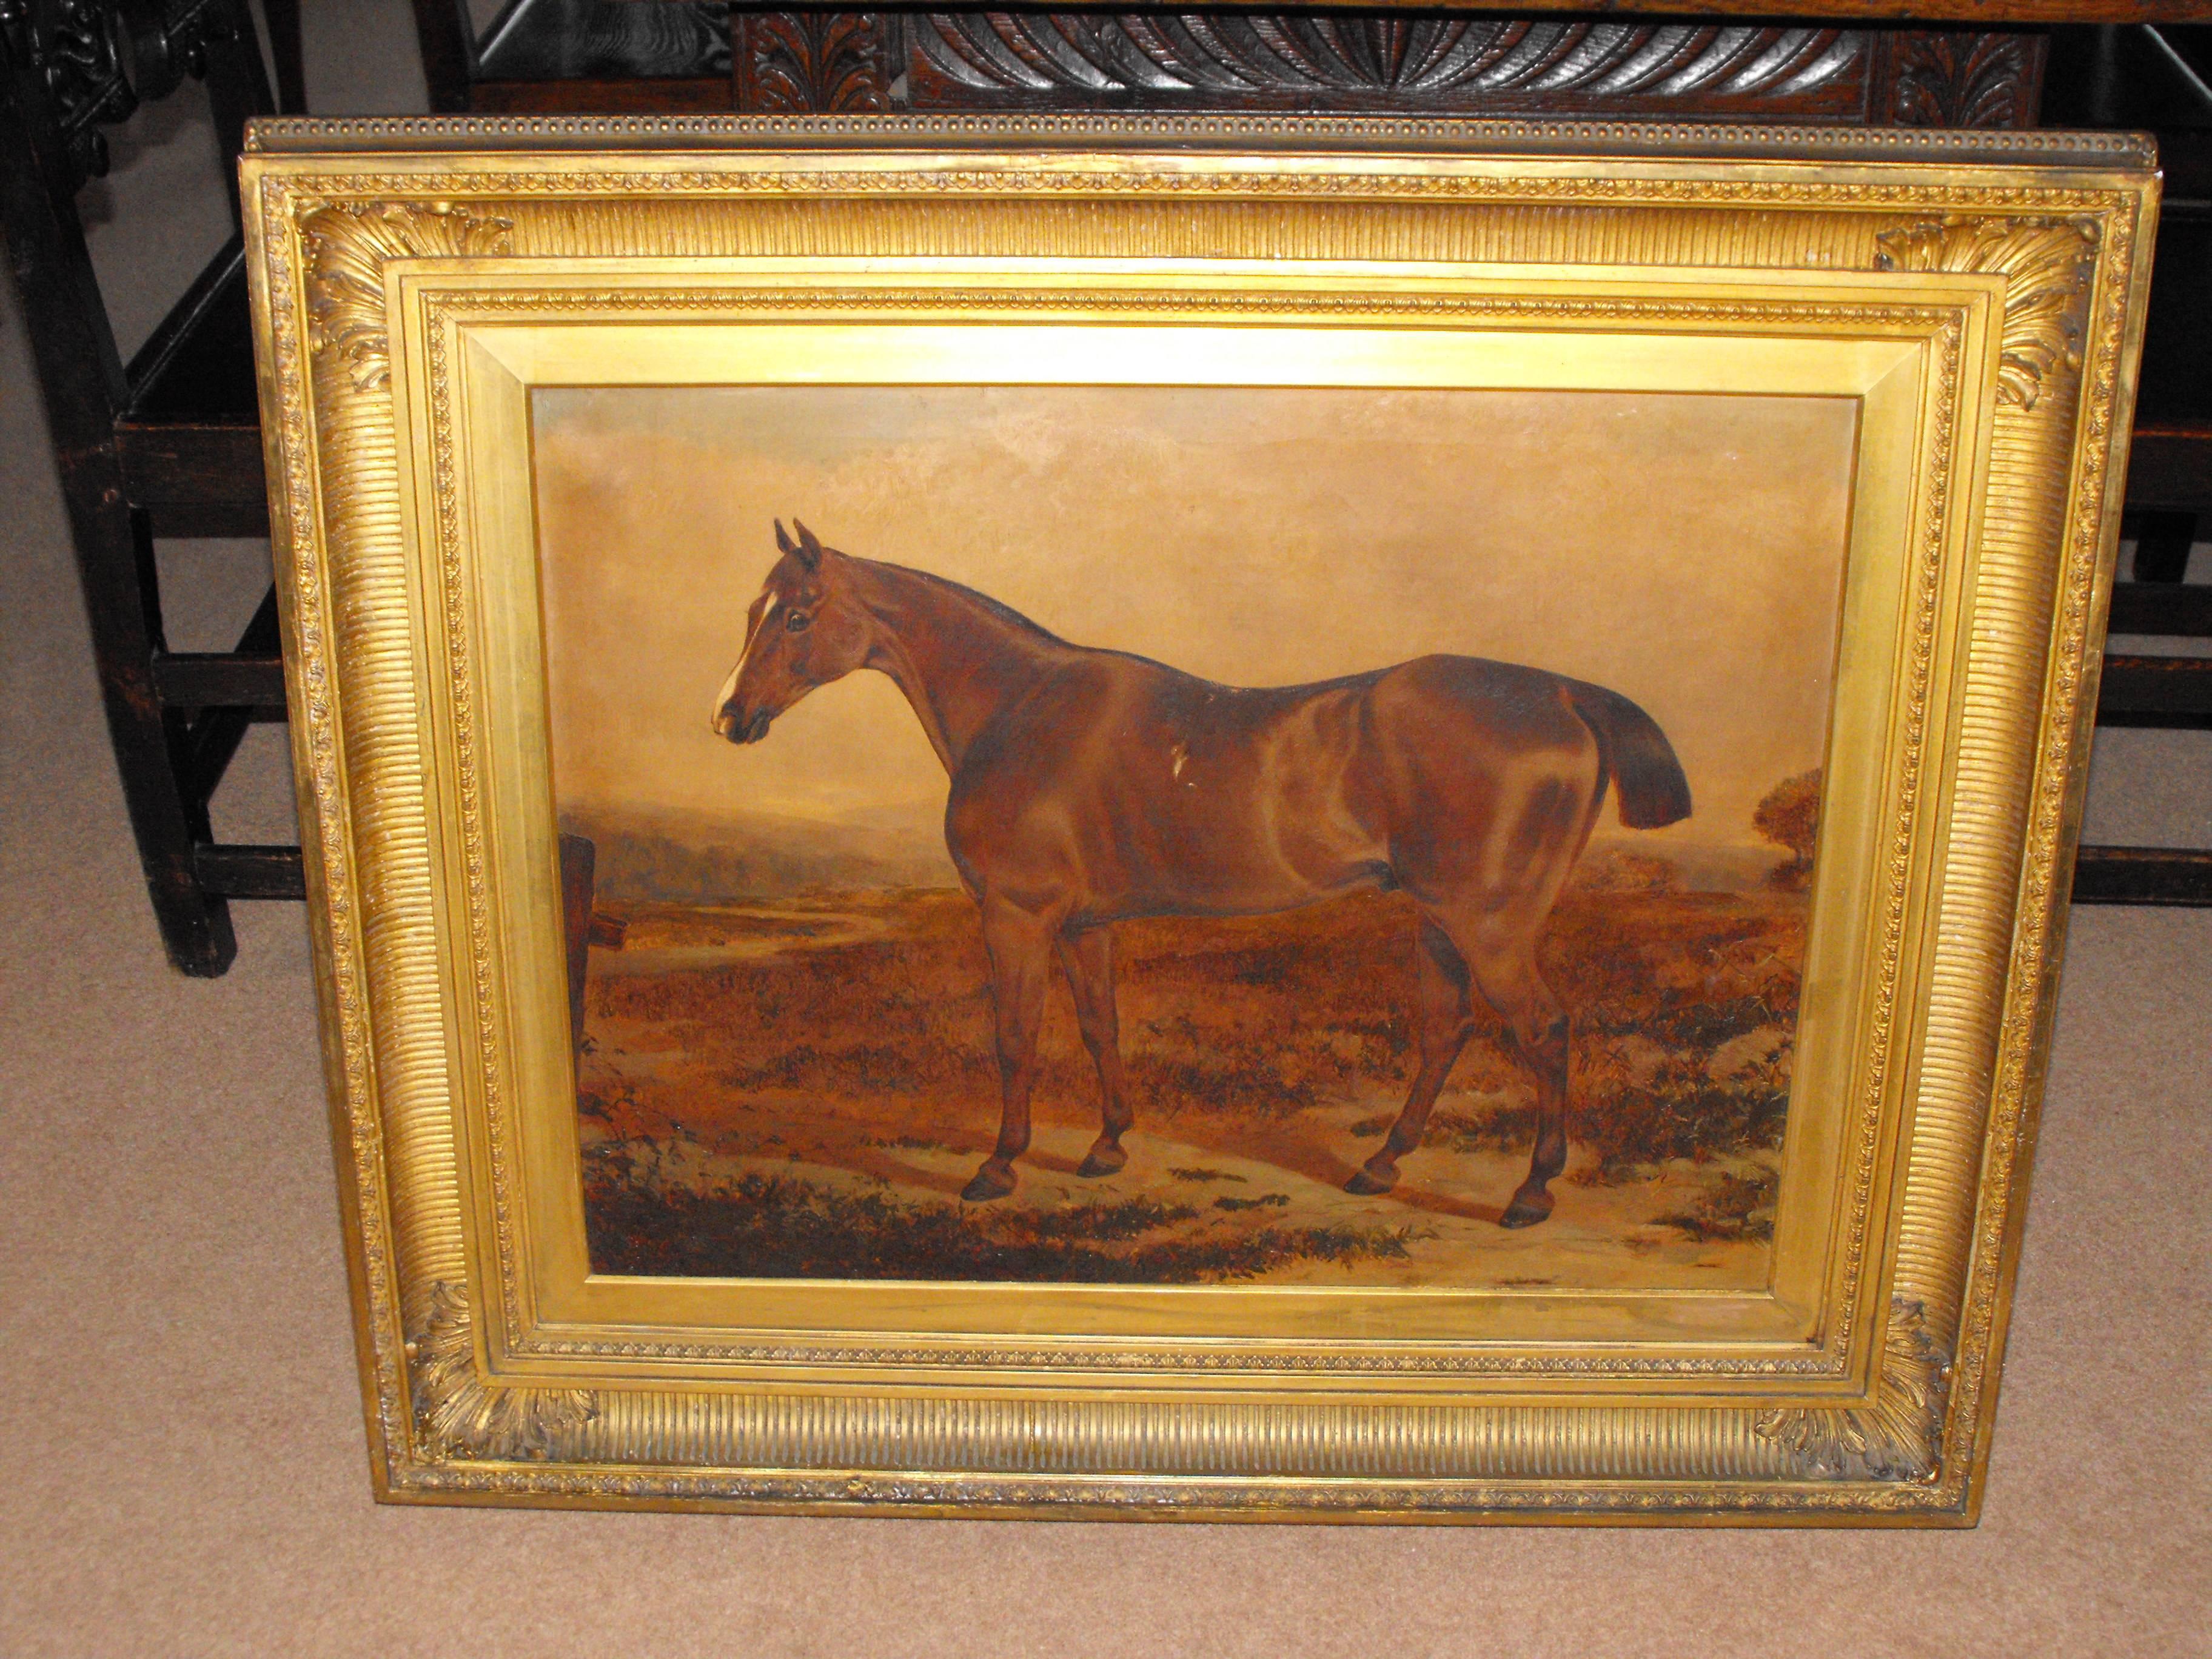  Antique oil painting on canvas of Brown Prize Hunting Horse 19th century - Victorian Painting by John Frederick Herring Sr.